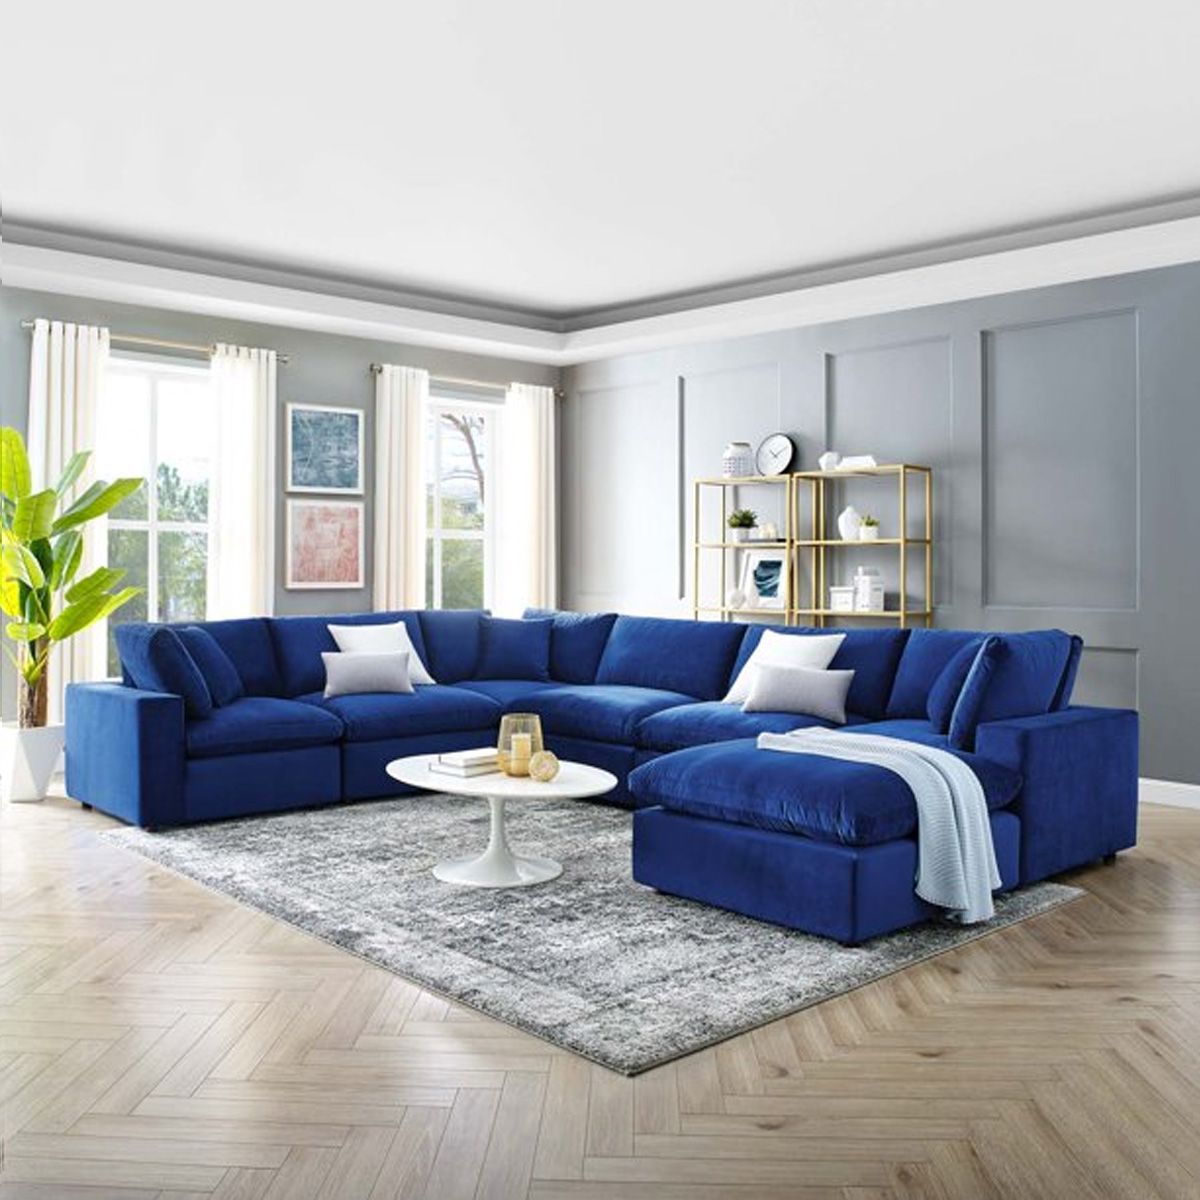 Commix Softer Microfiber Filling Overstuffed Performance 7 Piece Sectional Sofa In Navy Blue From Aed 6949 Atoz Furniture